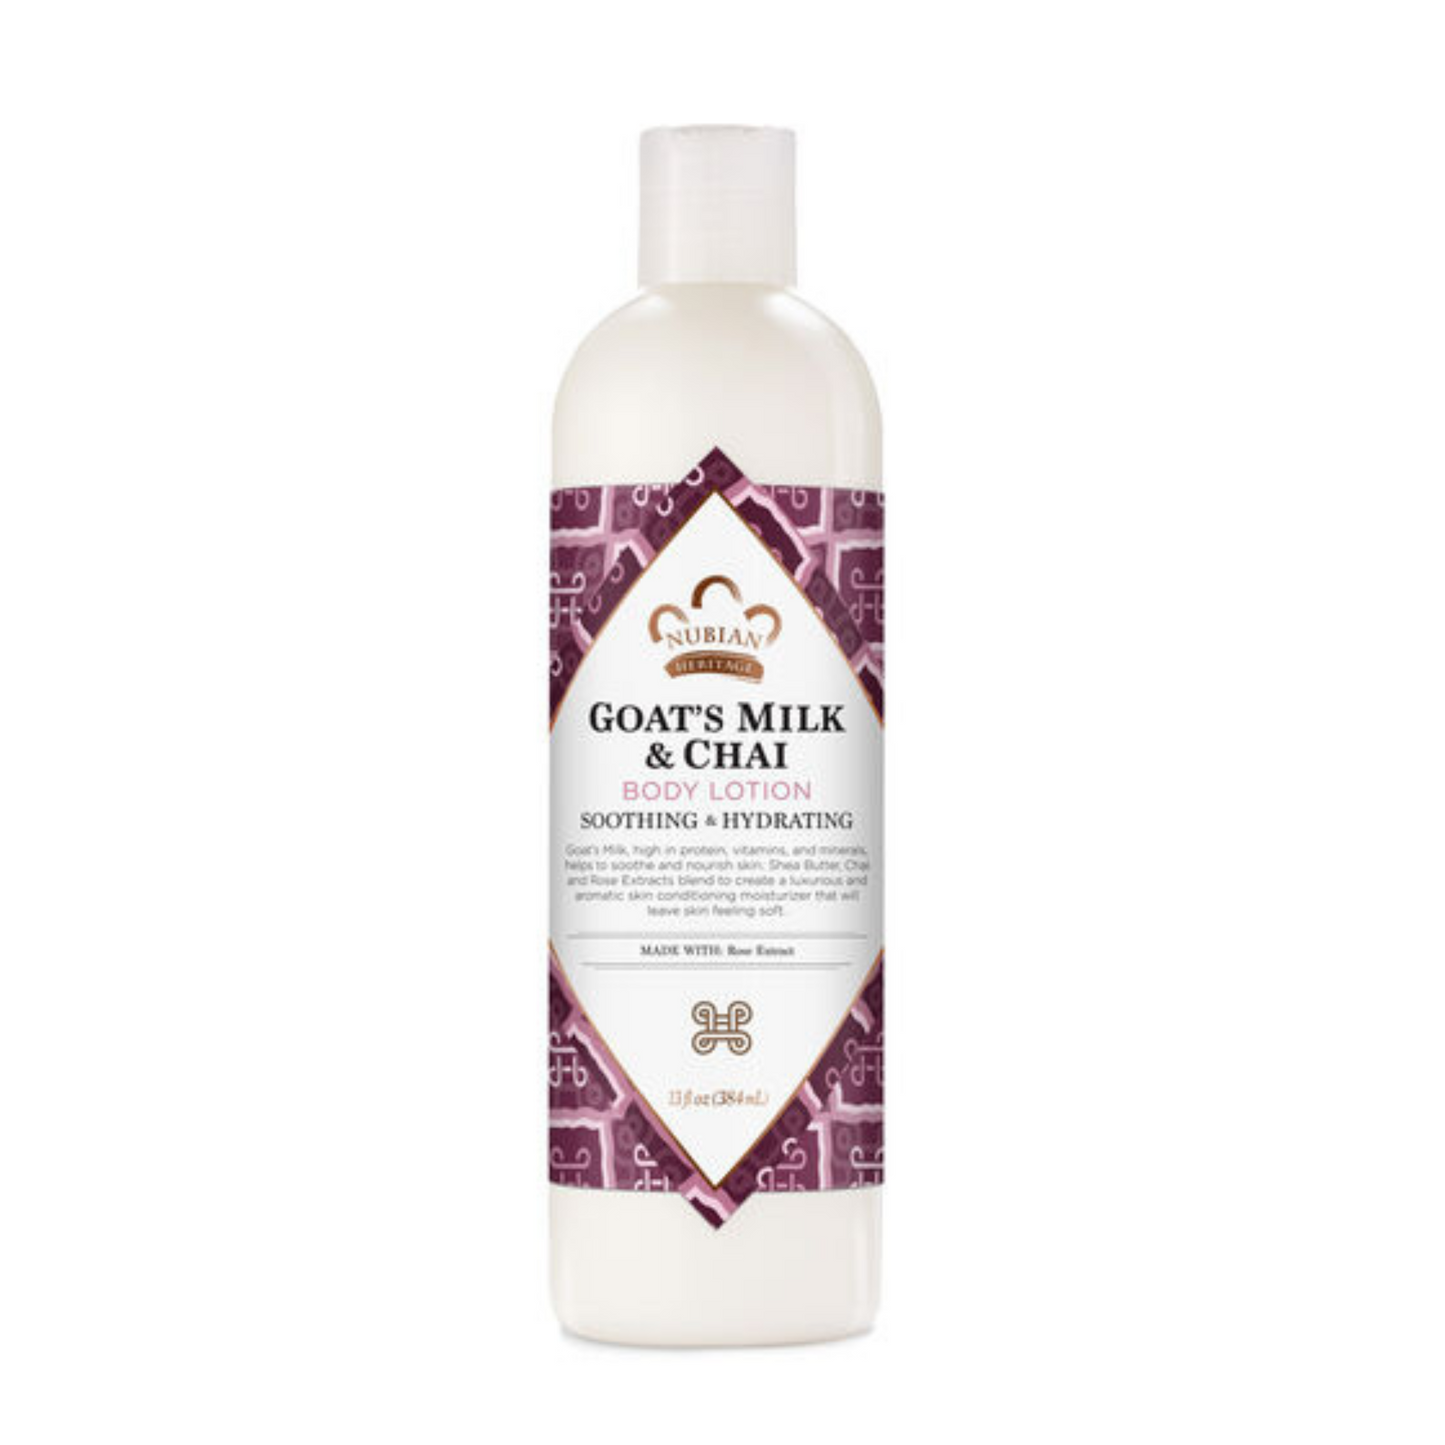 Primary Image of Nubian Heritage Goat's Milk Chai Body Lotion